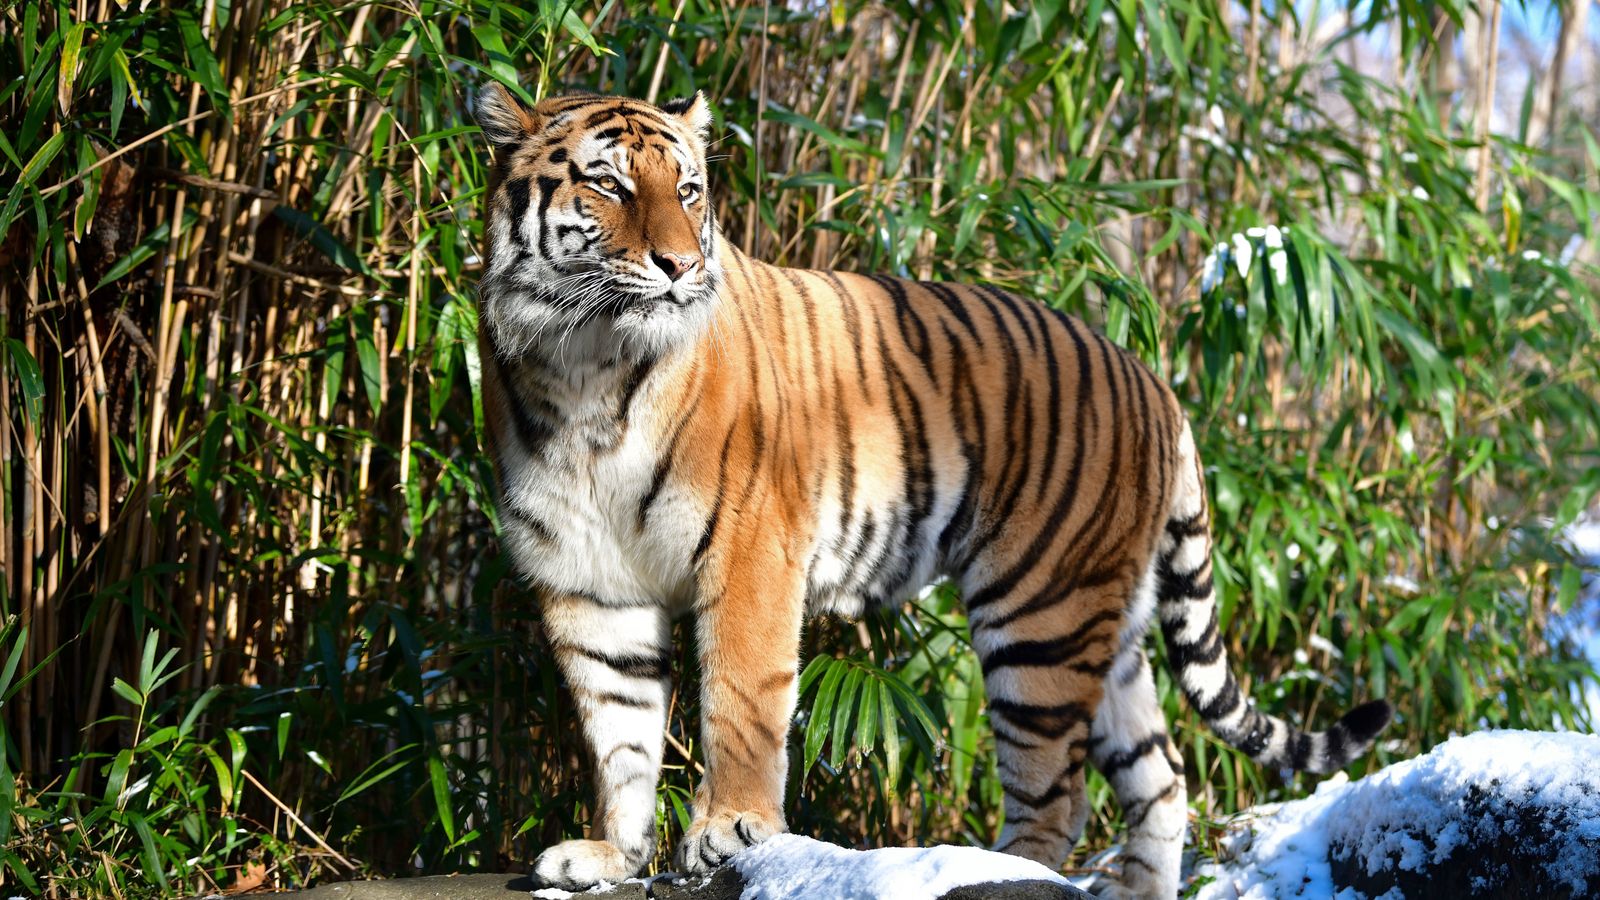 A tiger in a New York zoo has tested positive for coronavirus.